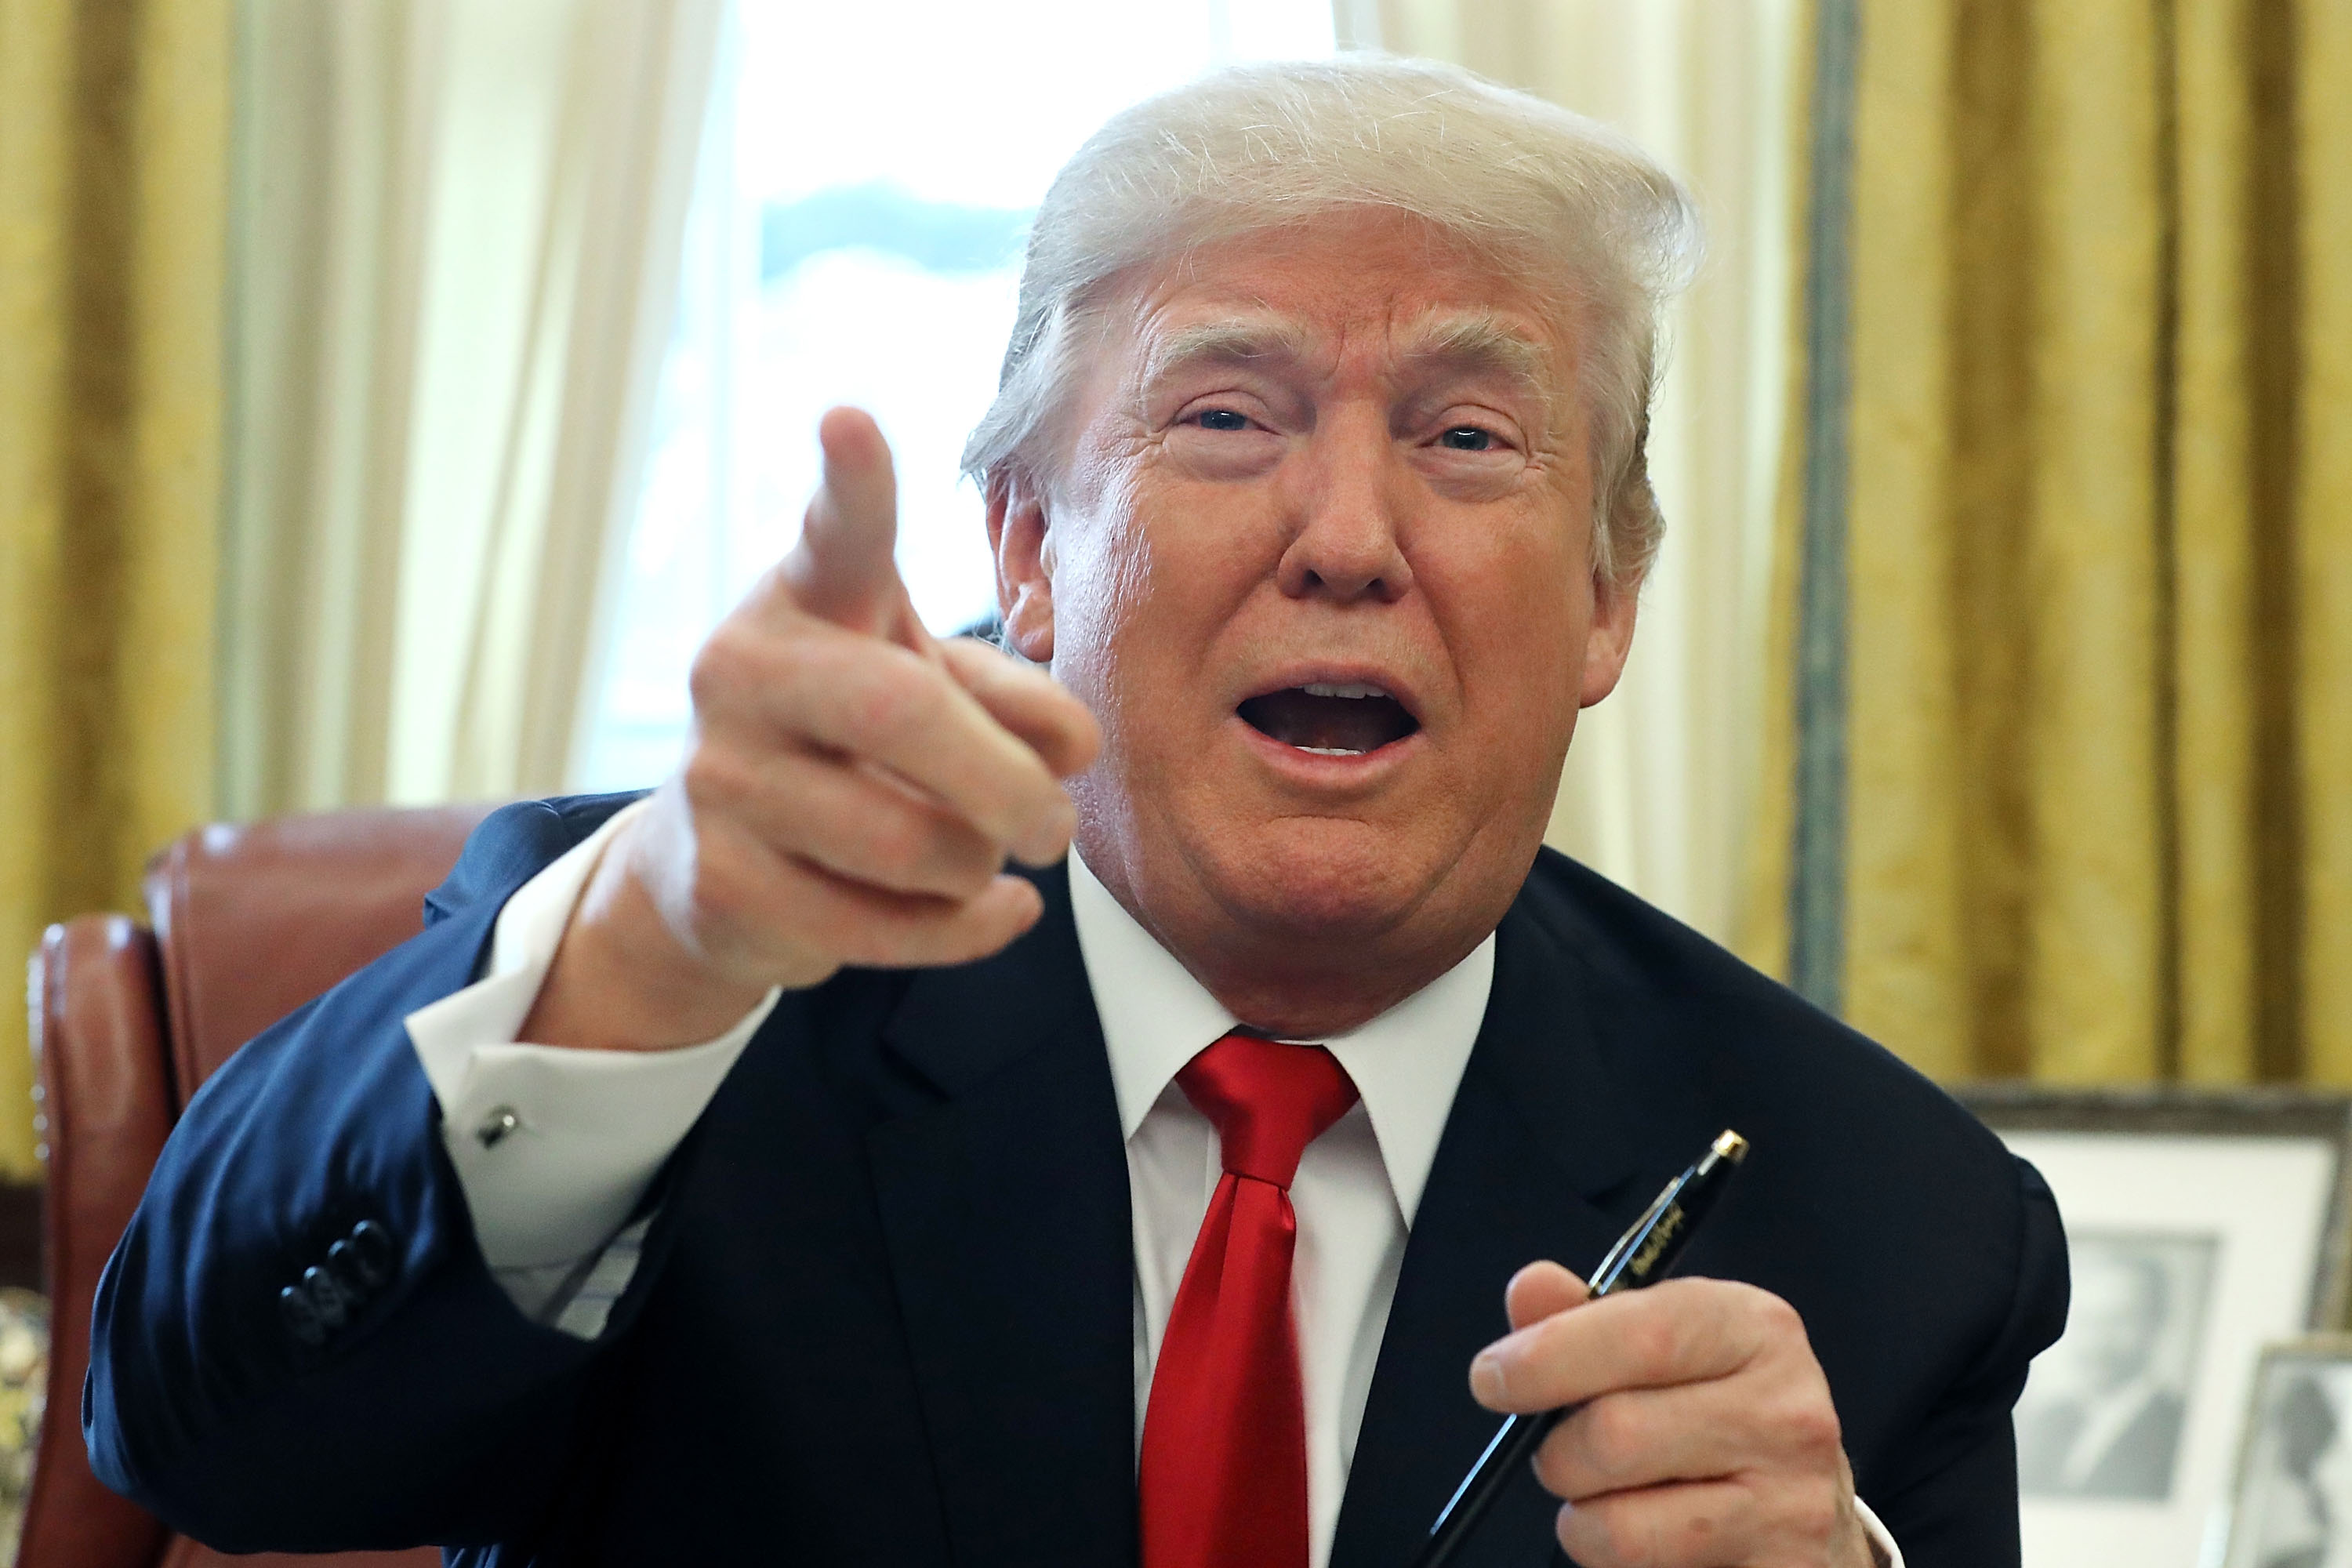 U.S. President Donald Trump talks with journalists after signing tax reform legislation into law in the Oval Office Dec. 22, 2017 in Washington, DC. (Chip Somodevilla—Getty Images)